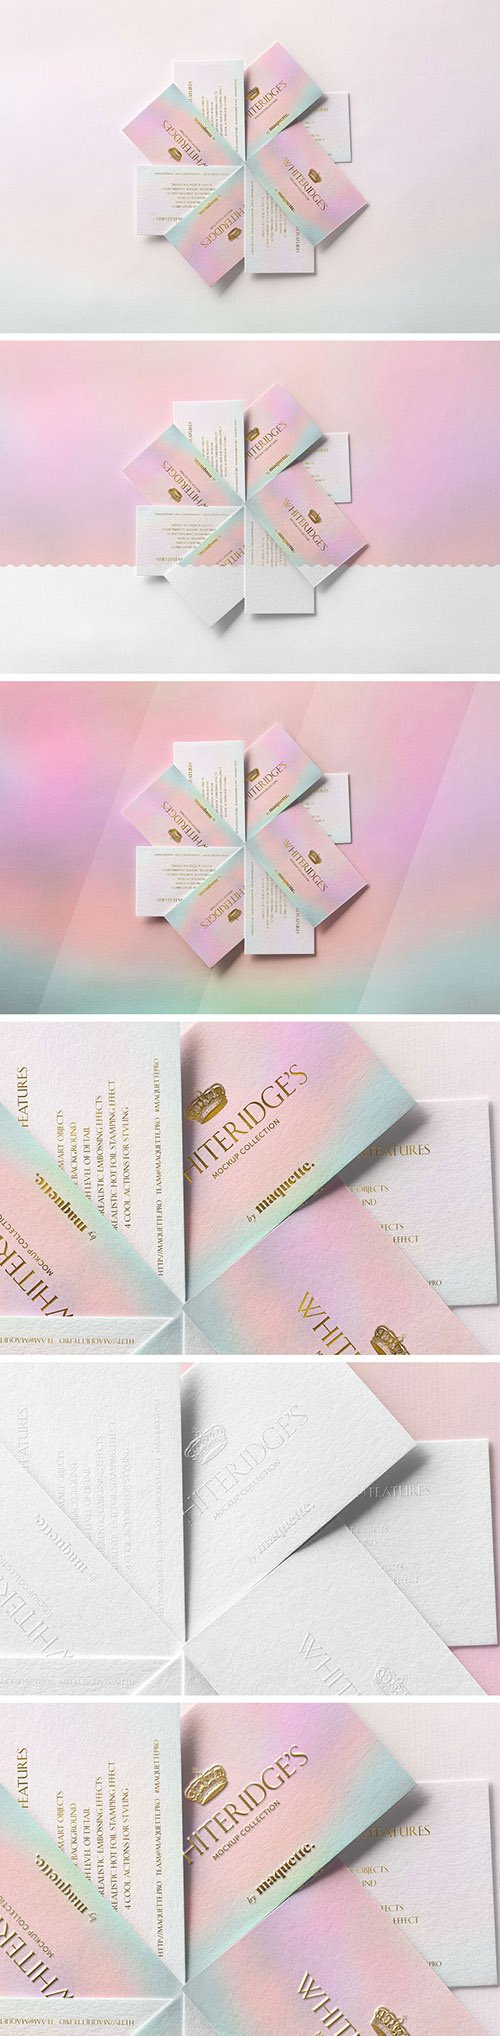 Fan of Luxury Business Cards with Gold Embossing Mockup 2